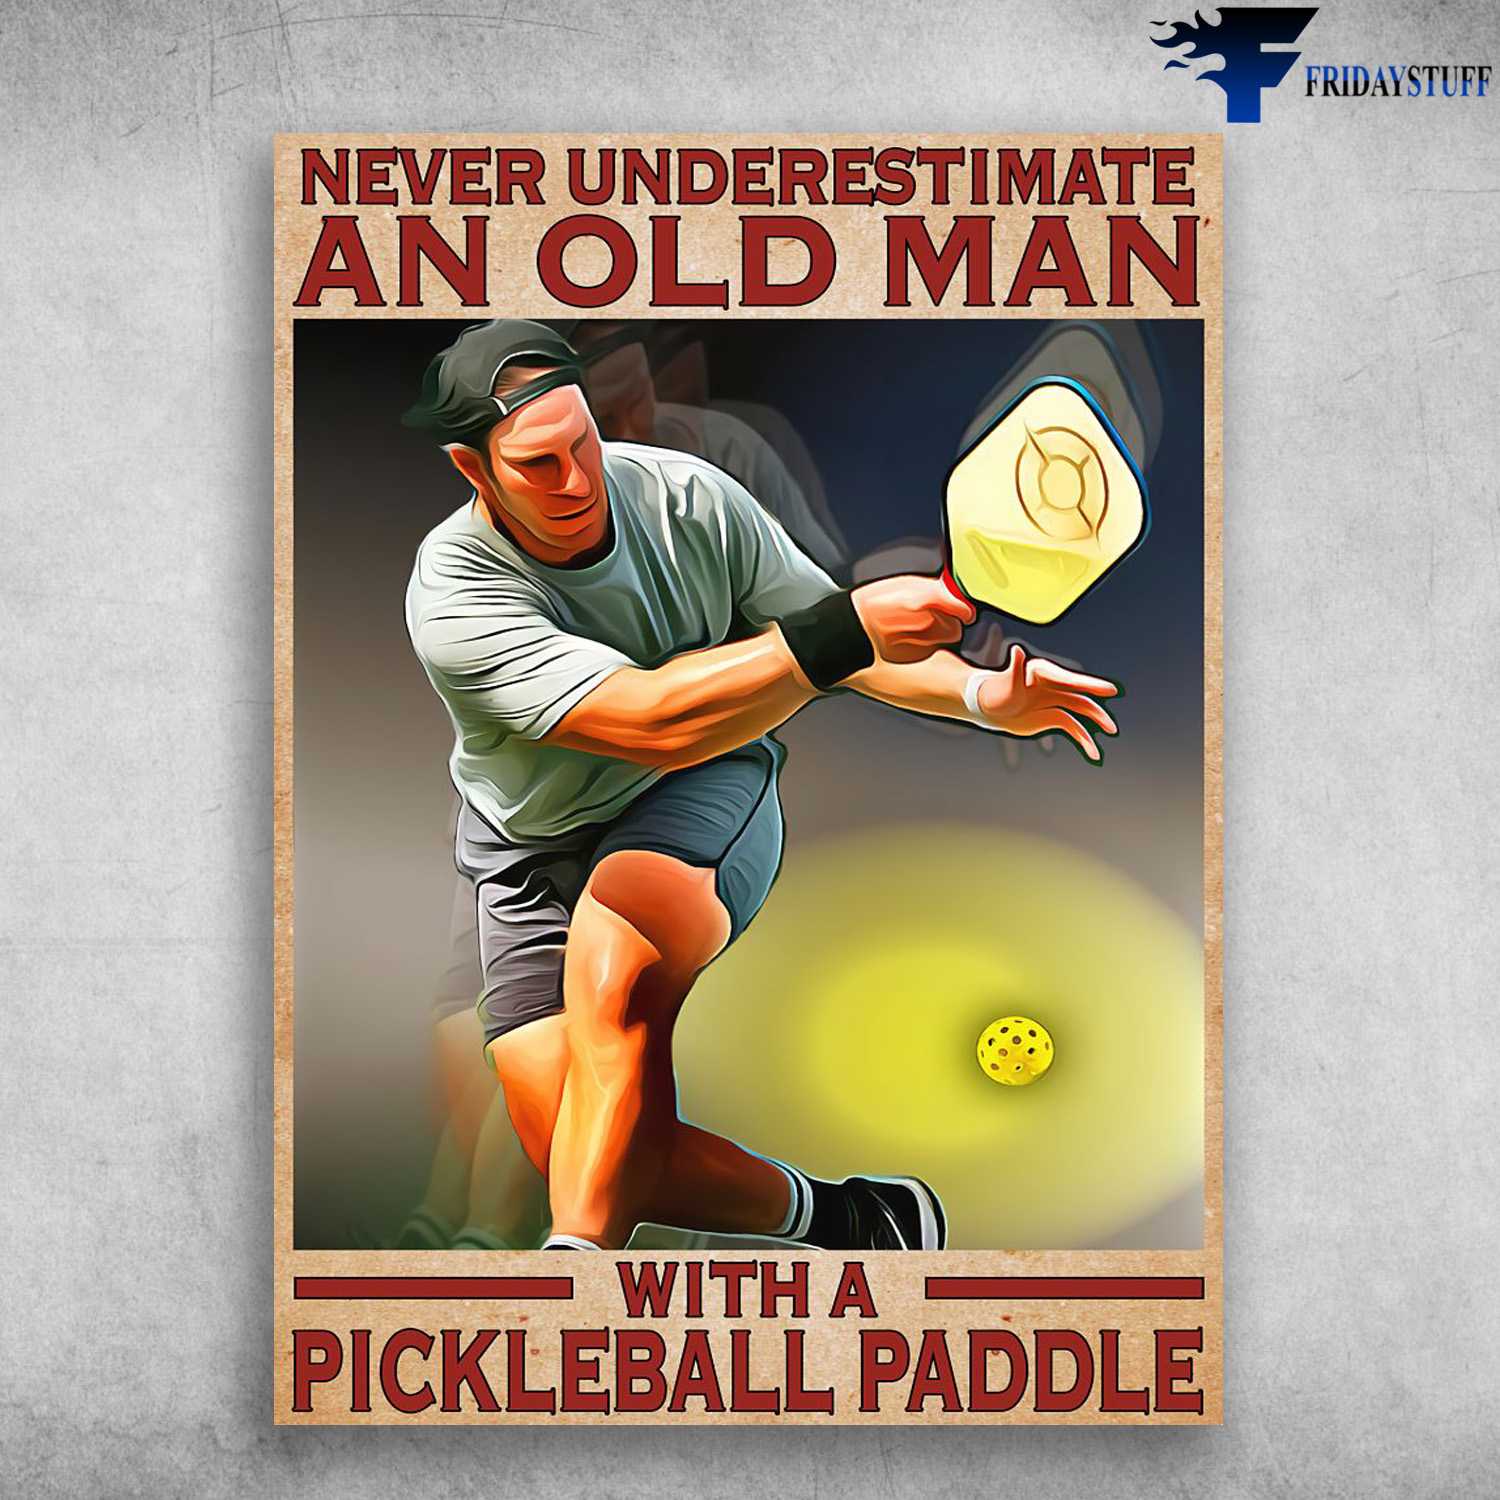 Pickleball Paddle, Pickleball Paddle Player, Never Underestimate An Old Man, With A Pickleball Paddle